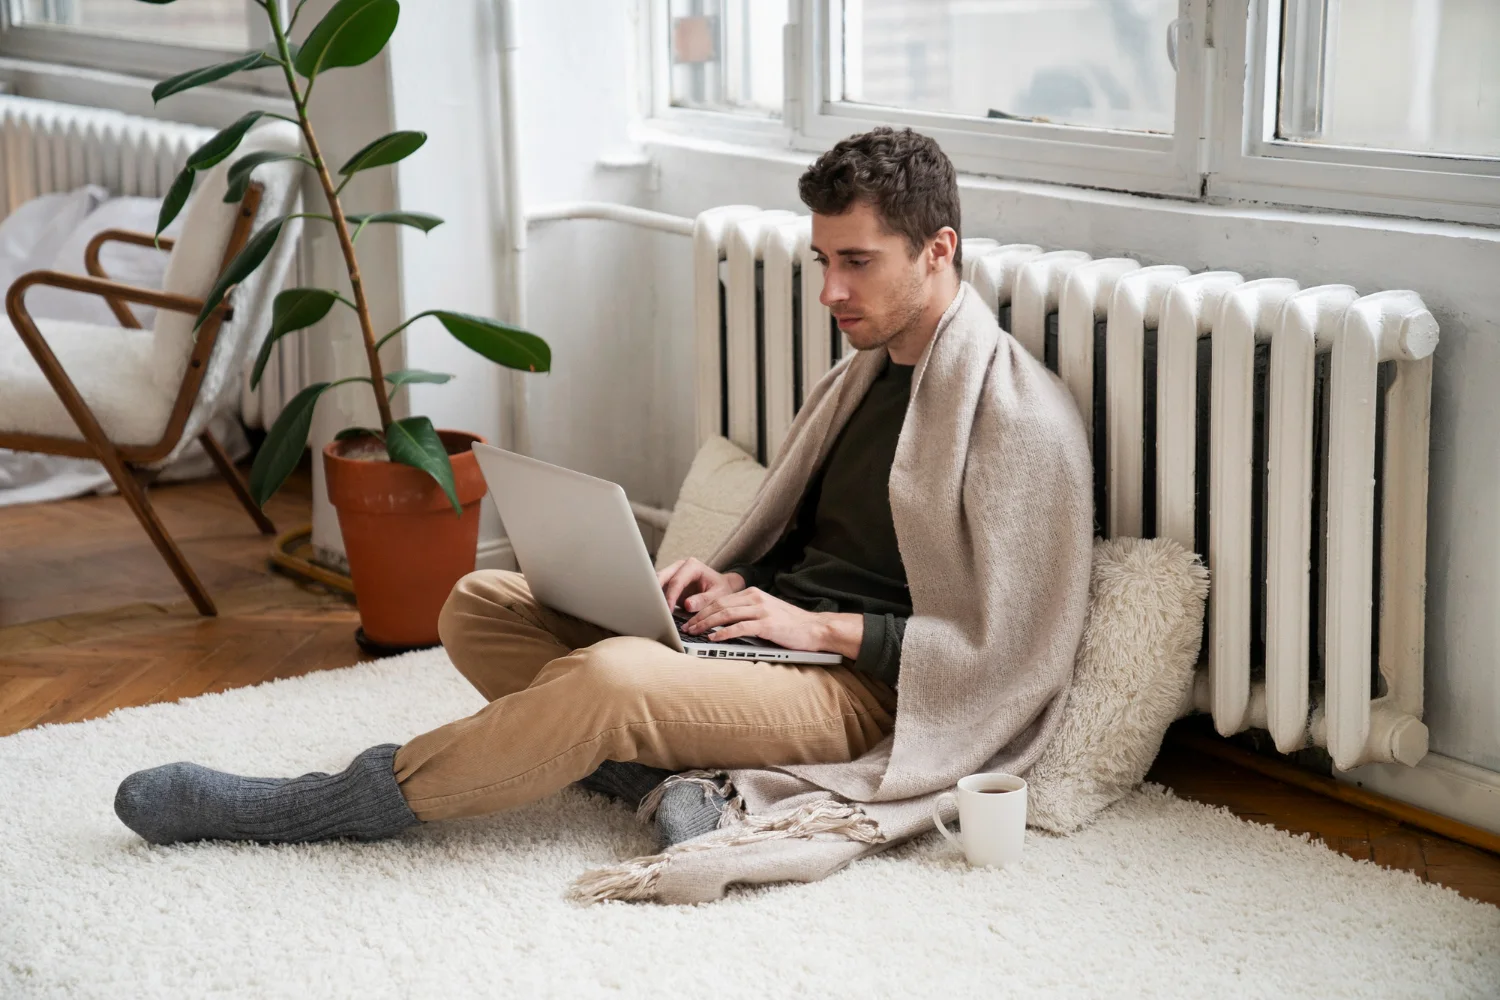 Person relaxing with laptop and coffee in front of their HVAC unit. Featured image for “Find The Right HVAC Settings For Winter In Your Home And Office”.